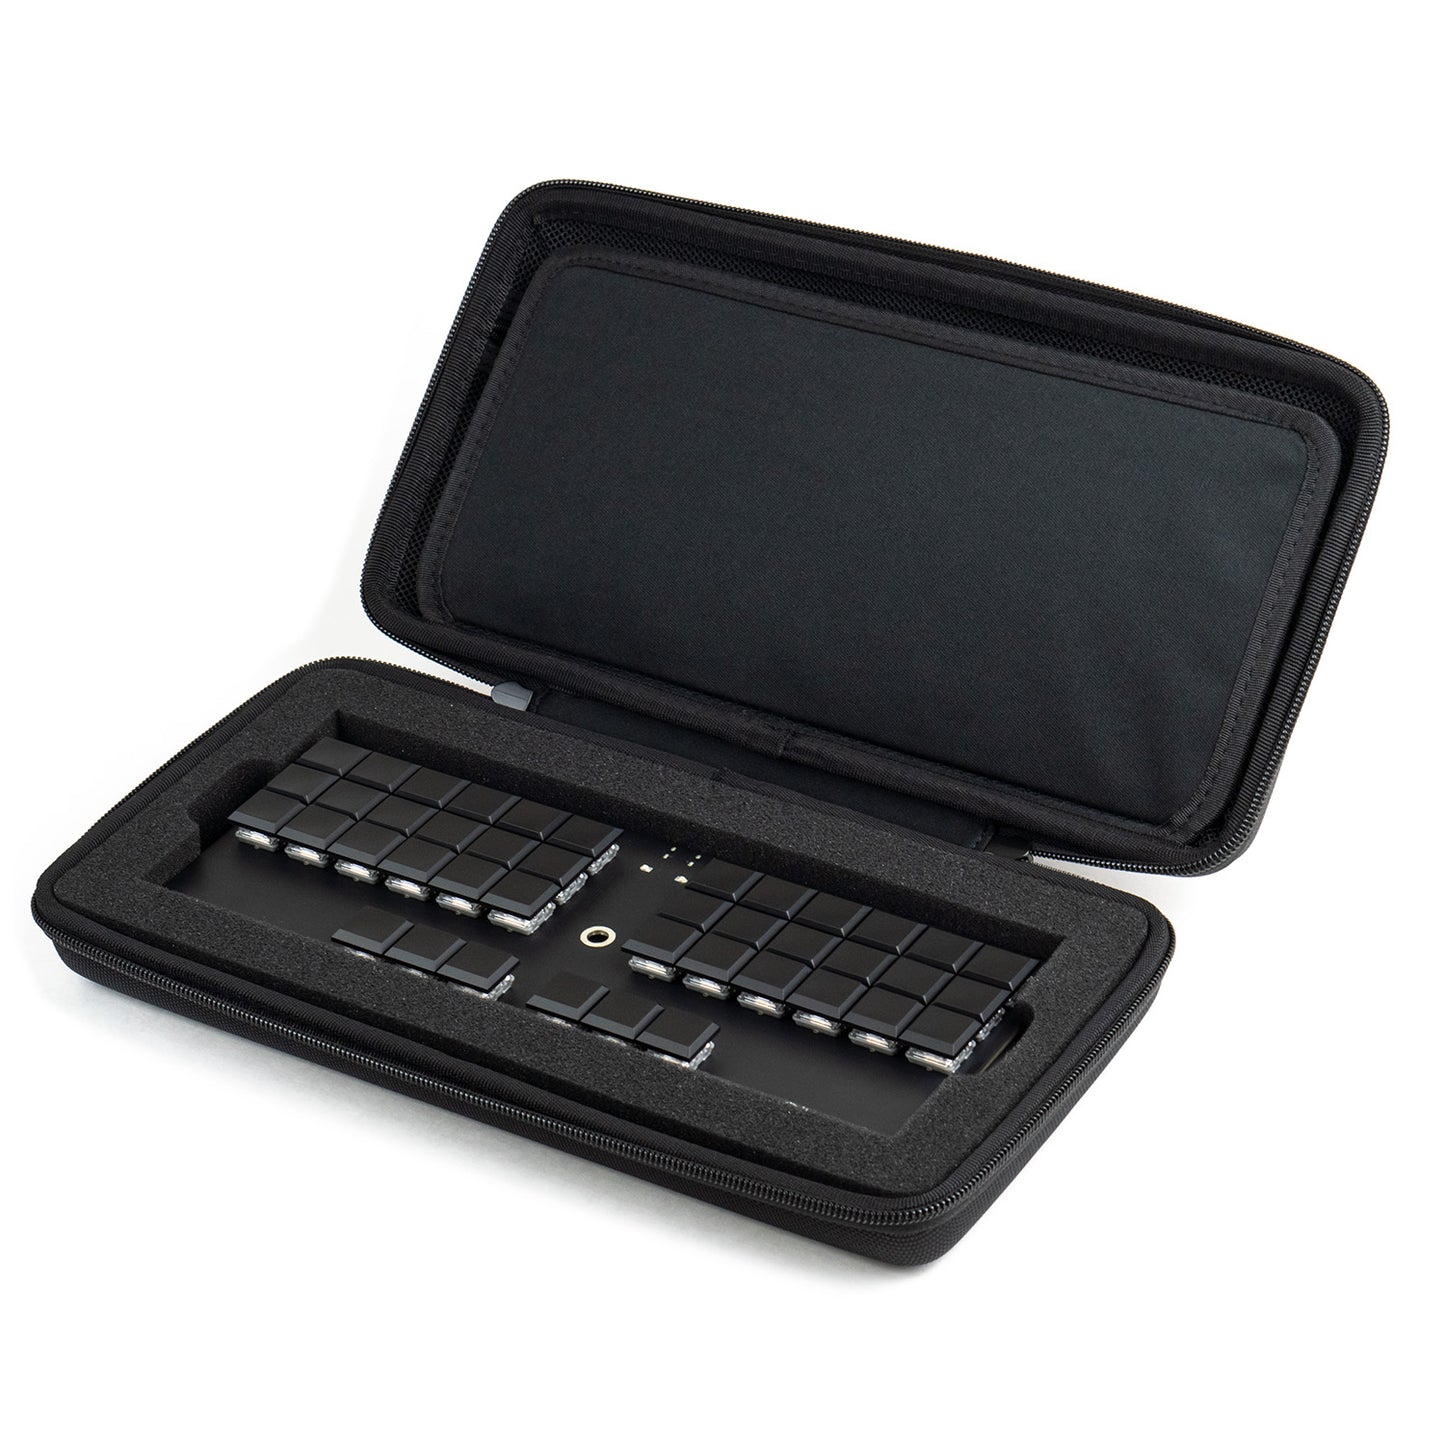 Multisteno (Case and cables included)